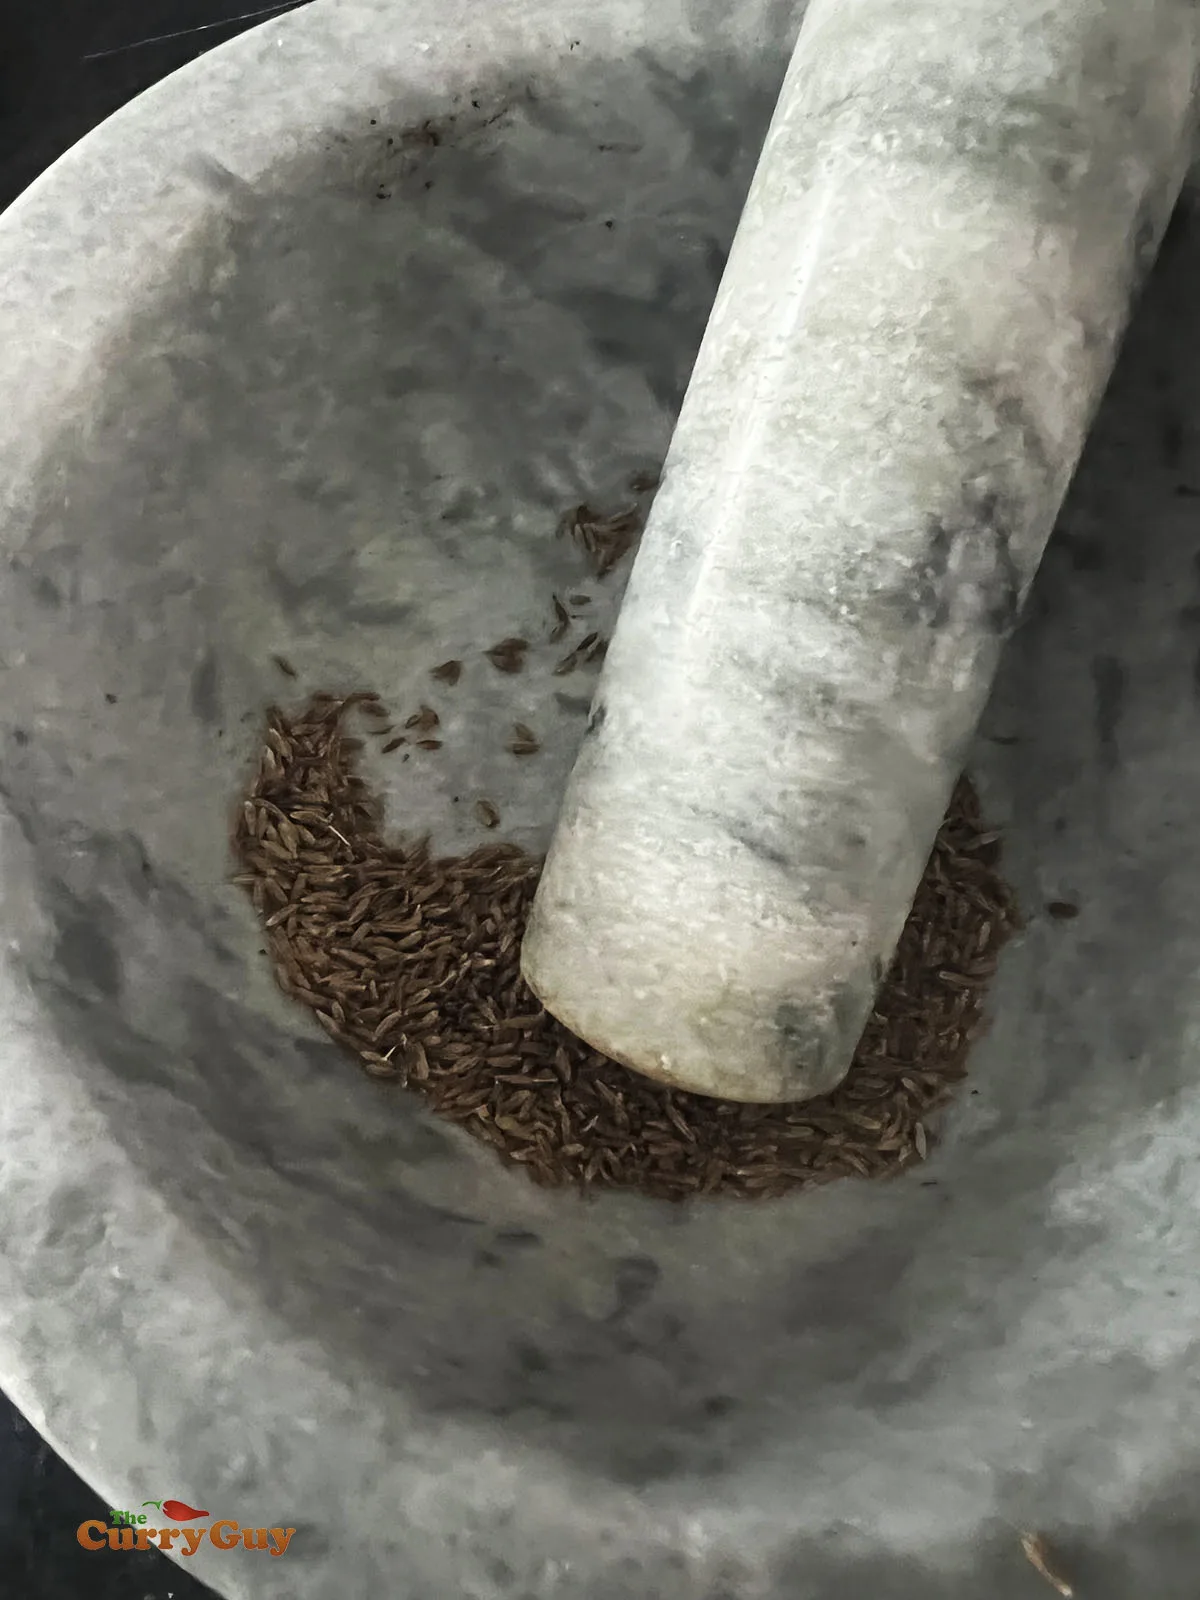 Pounding the cumin seeds in a pestle and mortar.